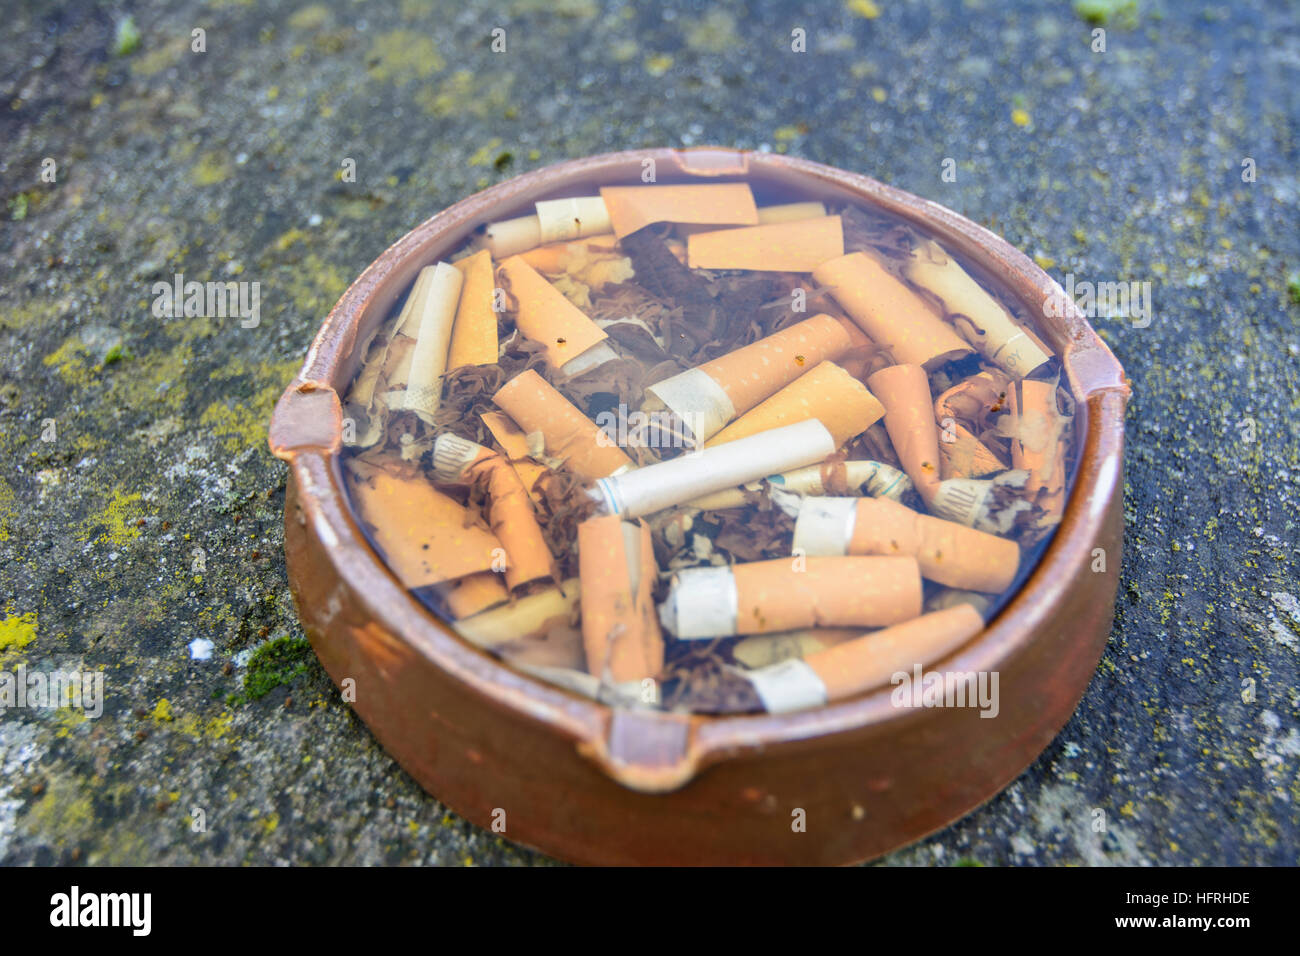 : Ashtrays, cigarette butts, flooded with rain water, , Germany Stock Photo